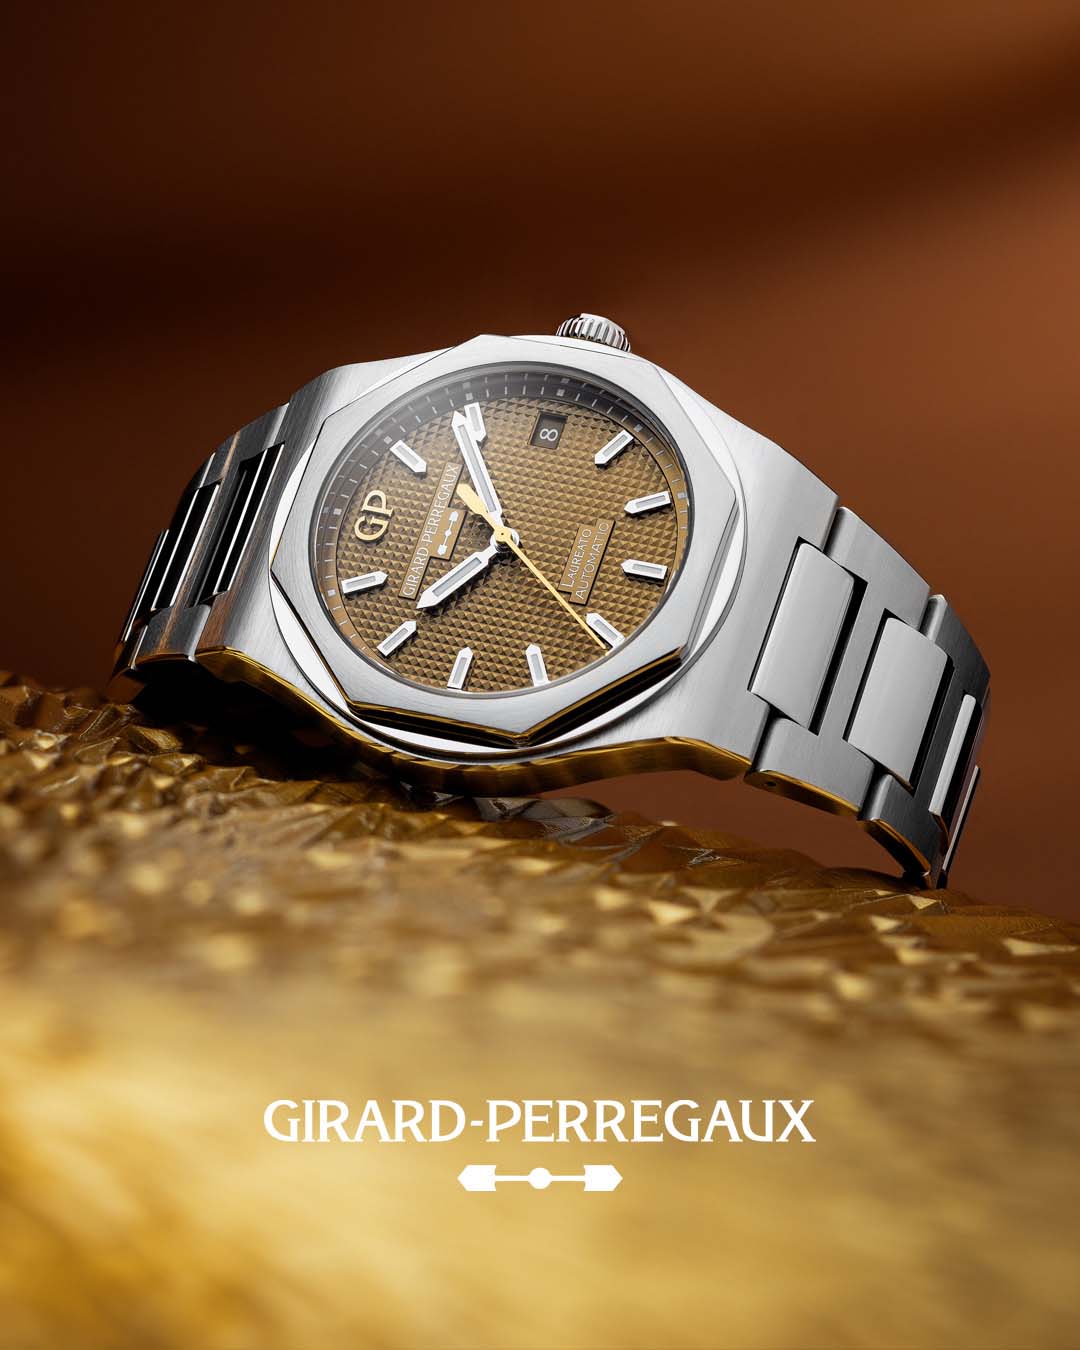 girard-perregaux-home-page-banner-mobile-sized